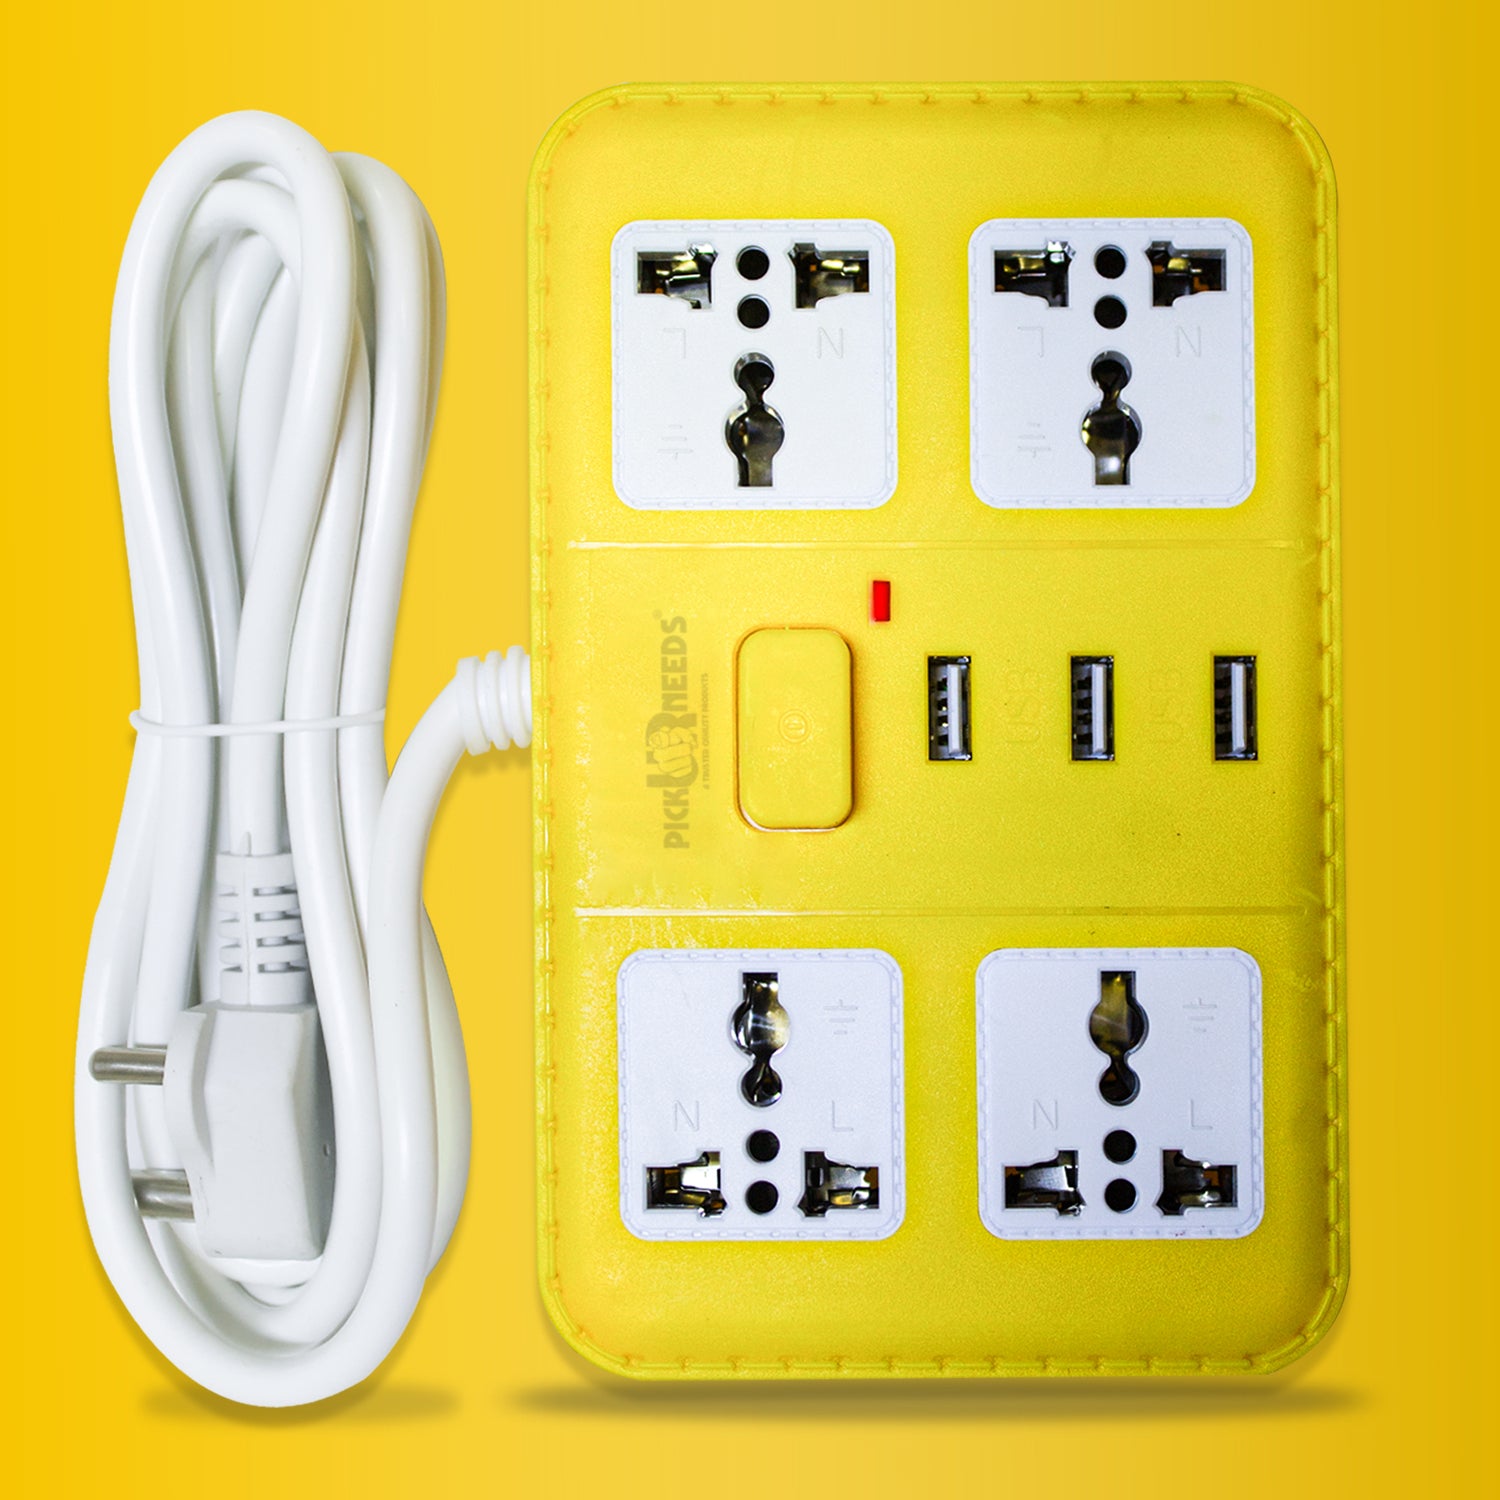 Pick Ur Needs Extension Cord Board with 3 USB Charging Ports and 4 Soc